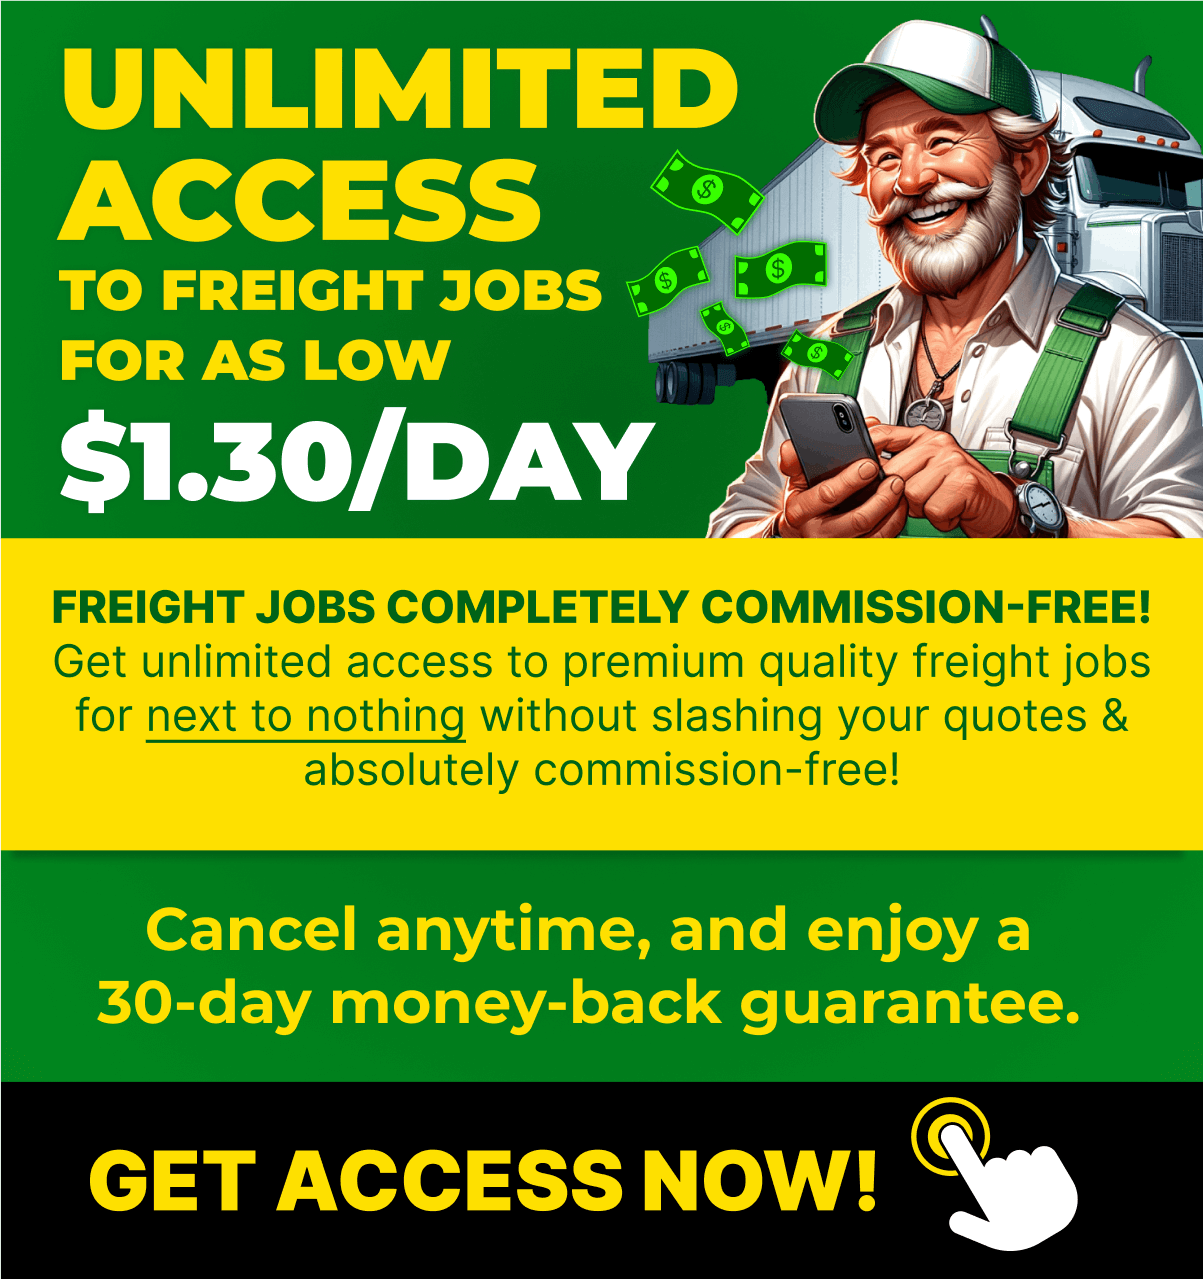 Freight Jobs For as Low $1.30/DAY